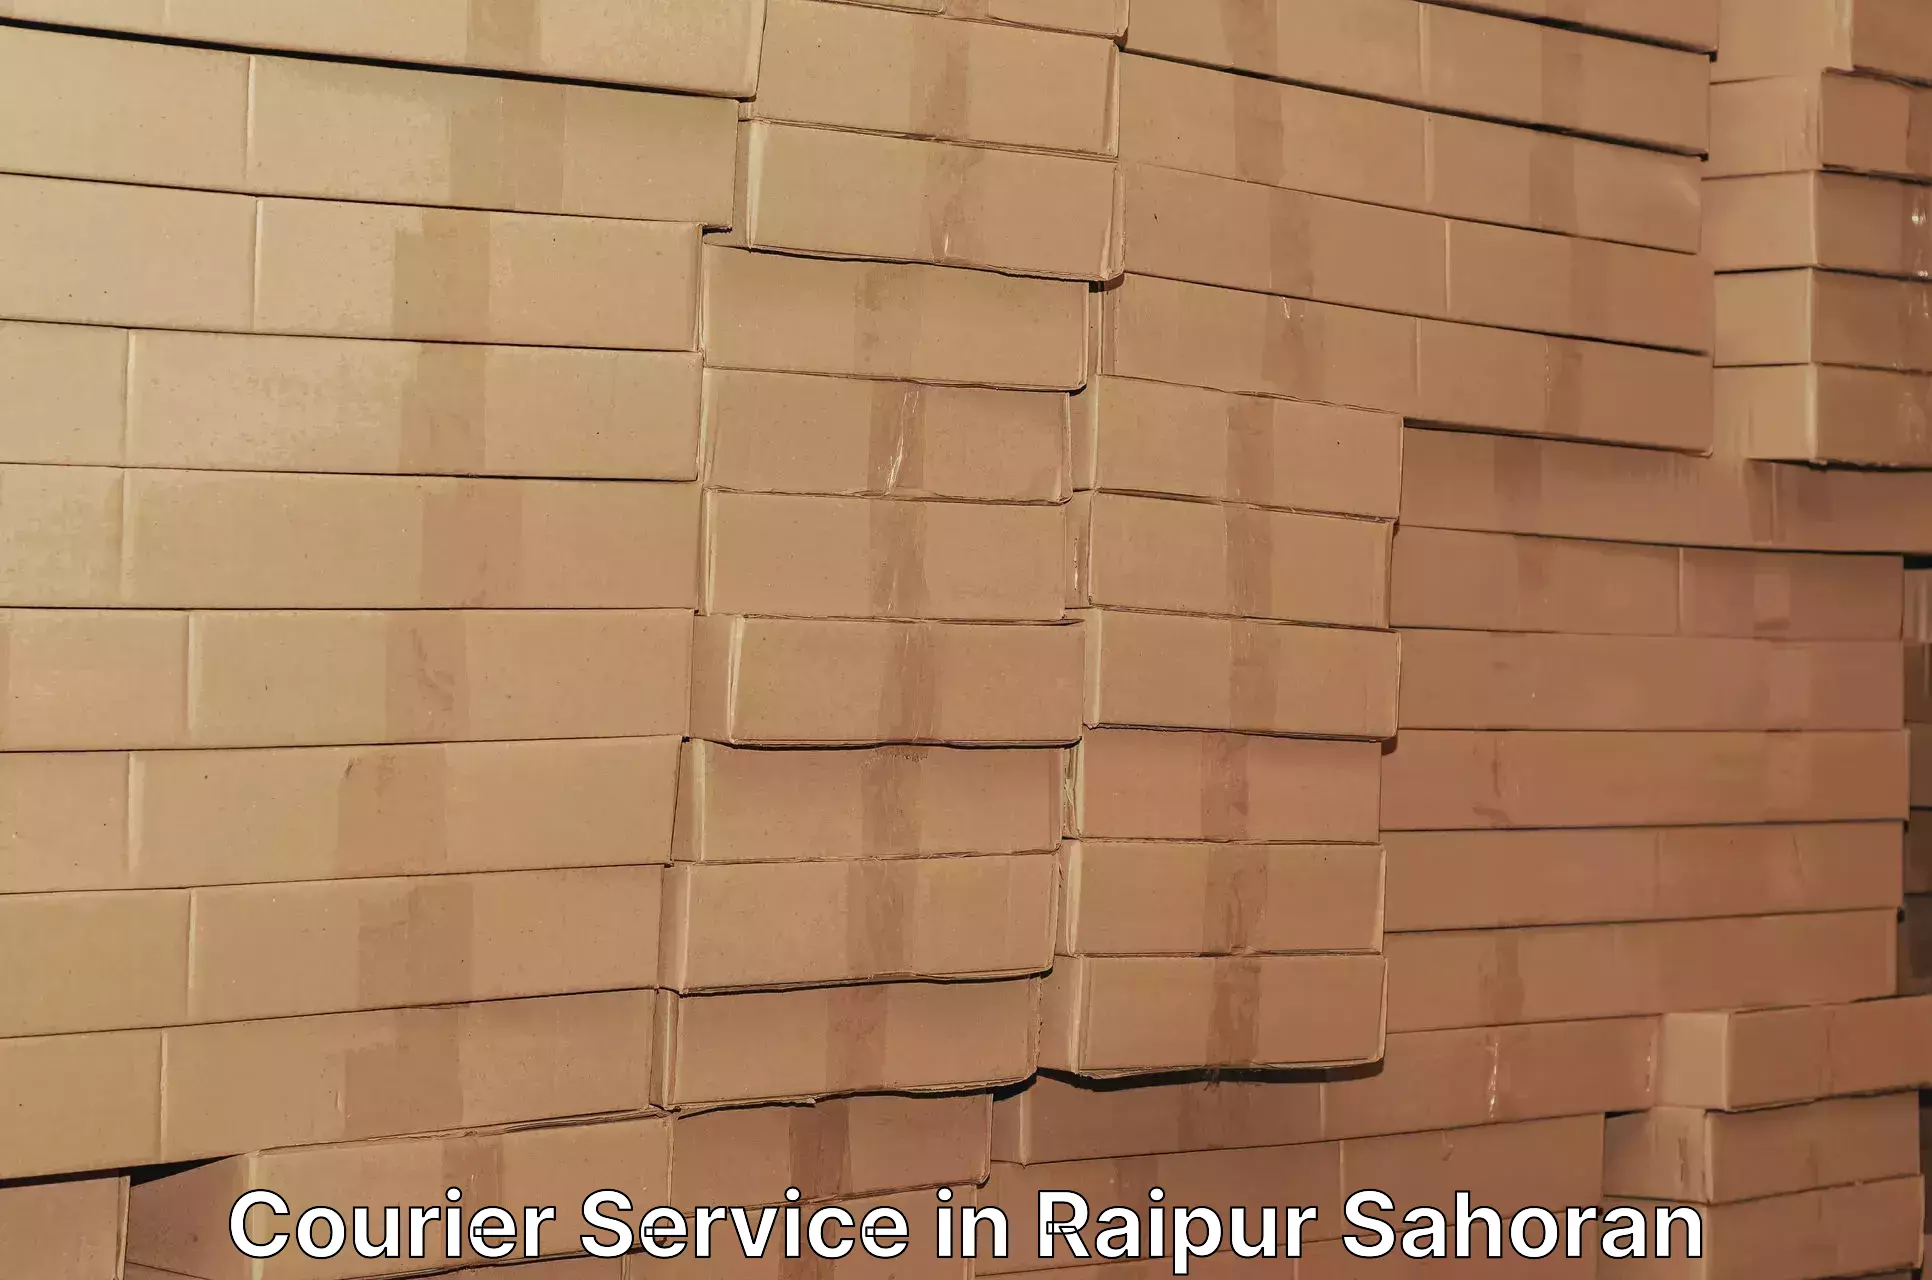 Business delivery service in Raipur Sahoran